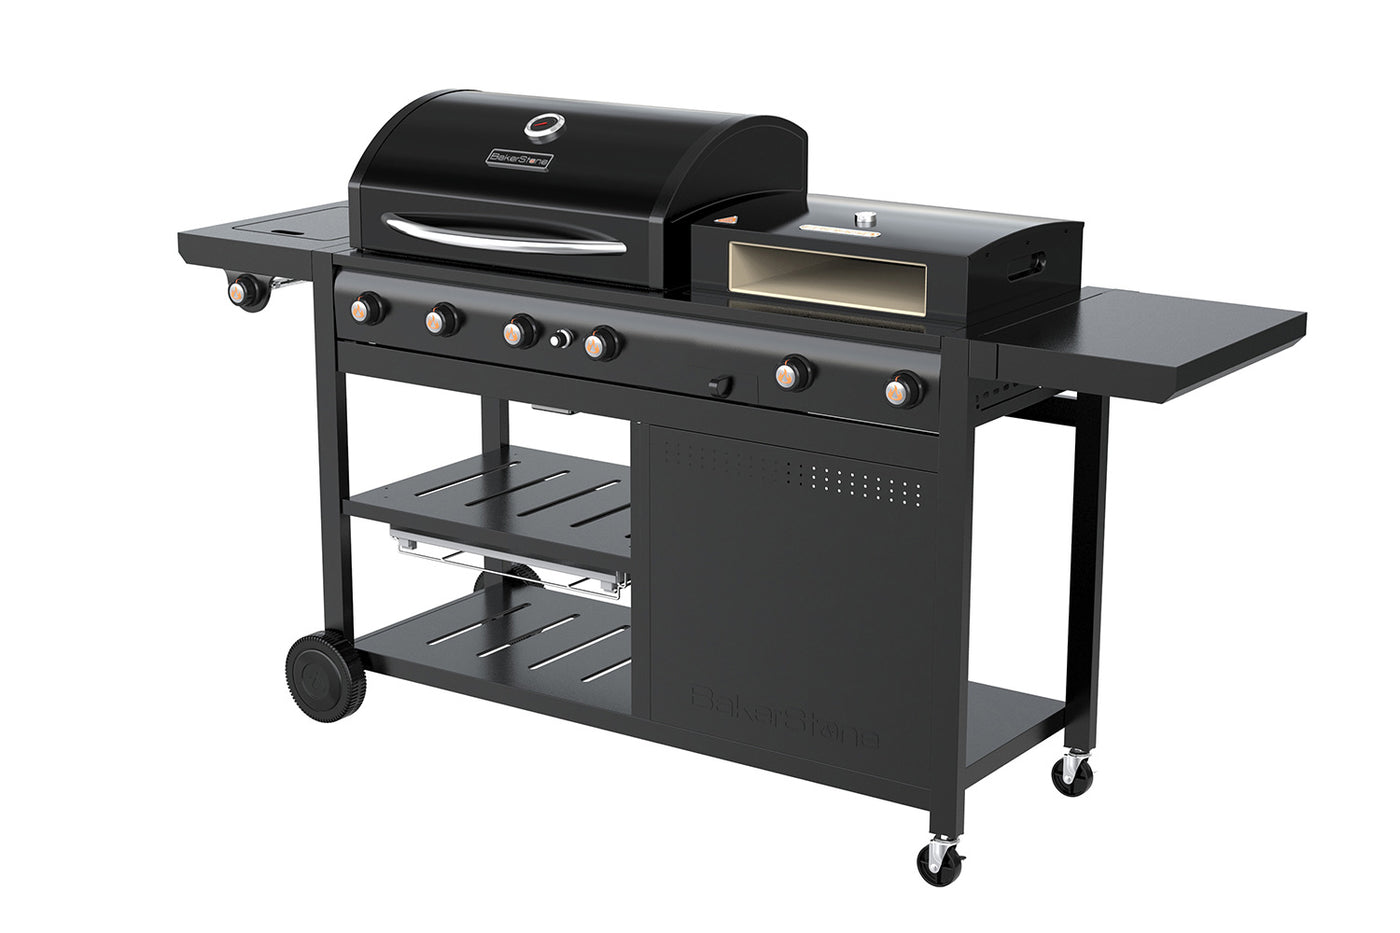 Outdoor Cooking Centers(BSO4500-EBK-SBM-000)